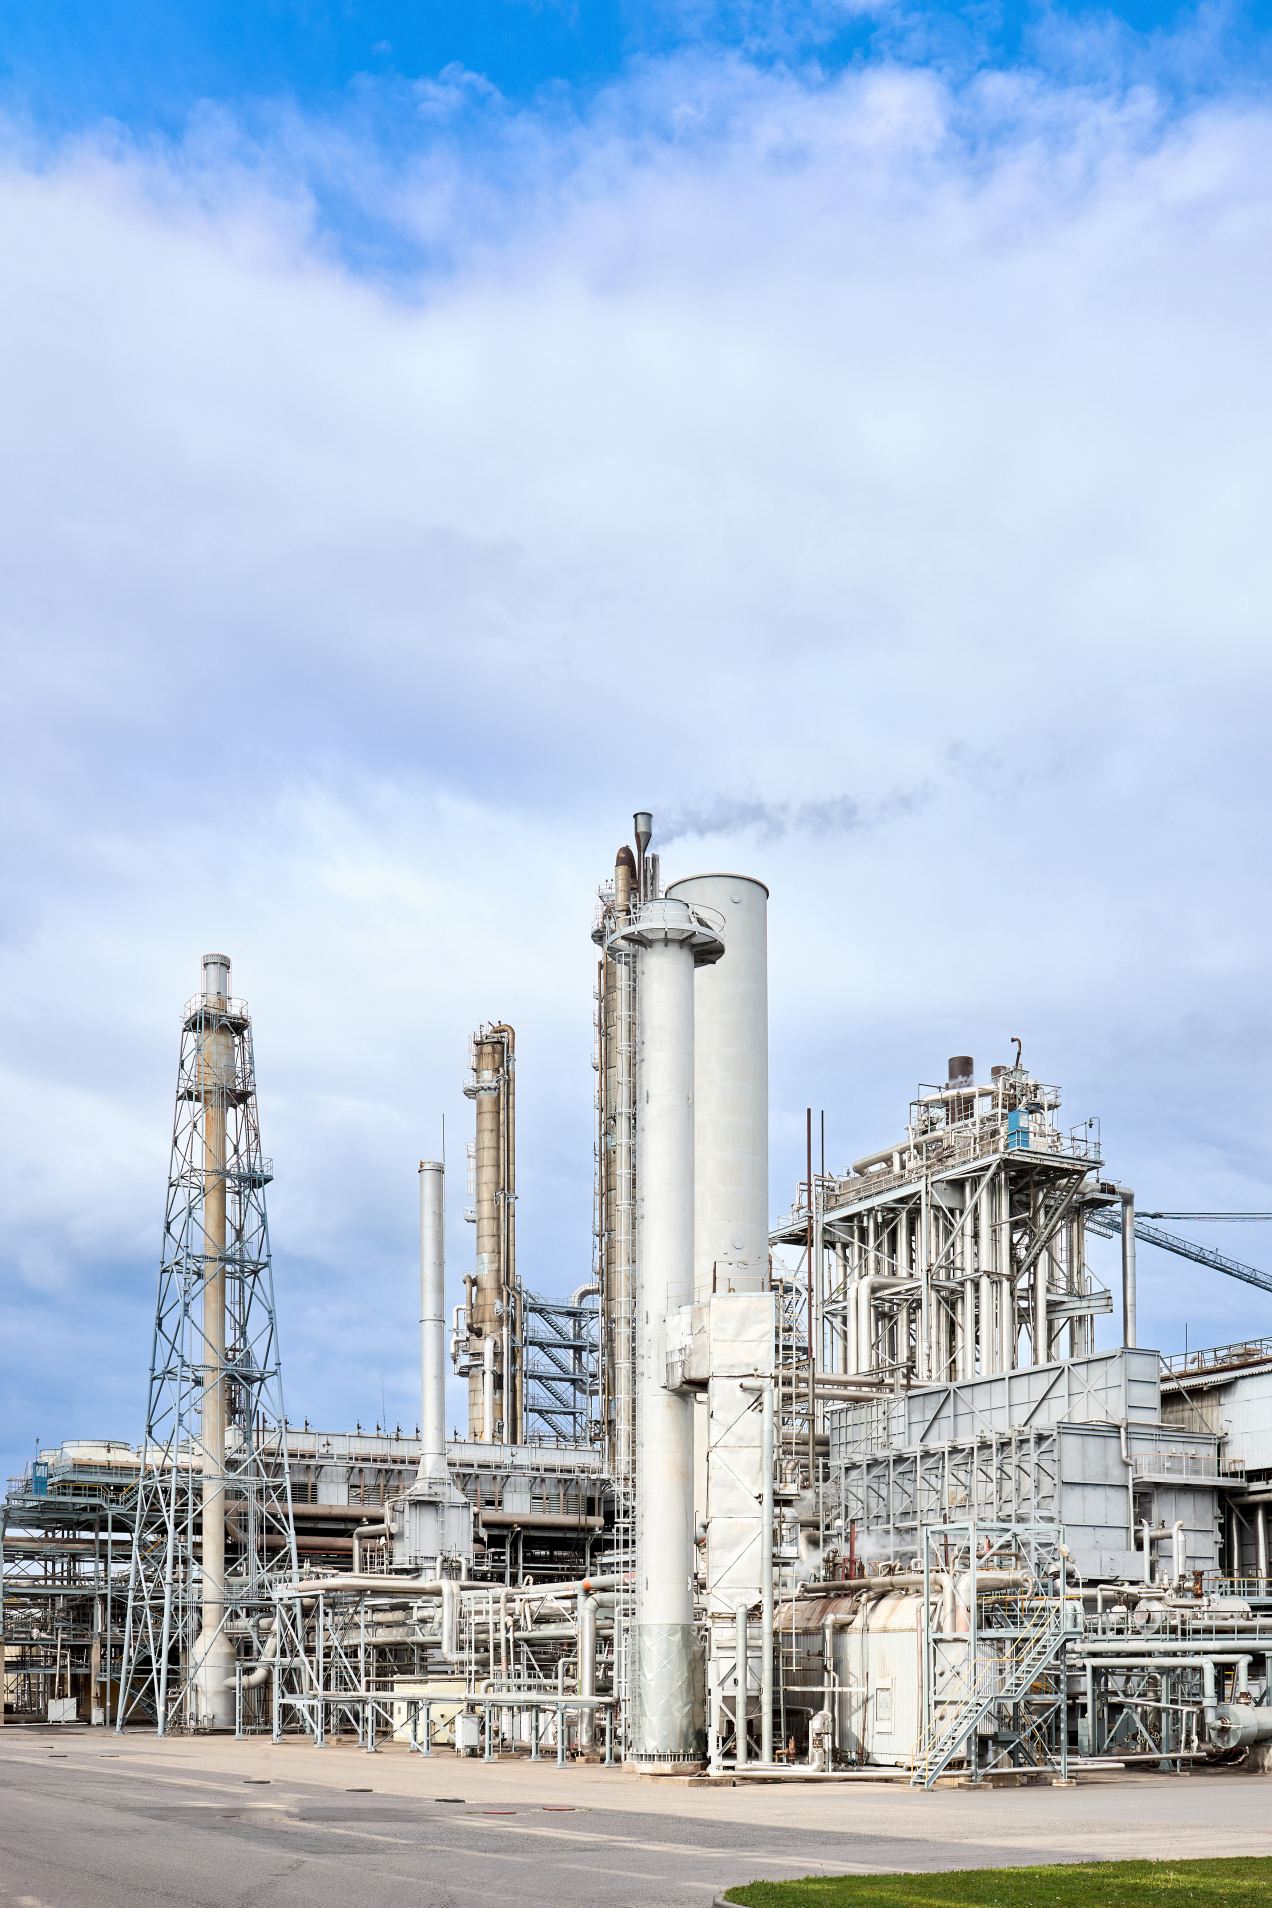 Exterior of modern petrochemical plant with reactors and converters